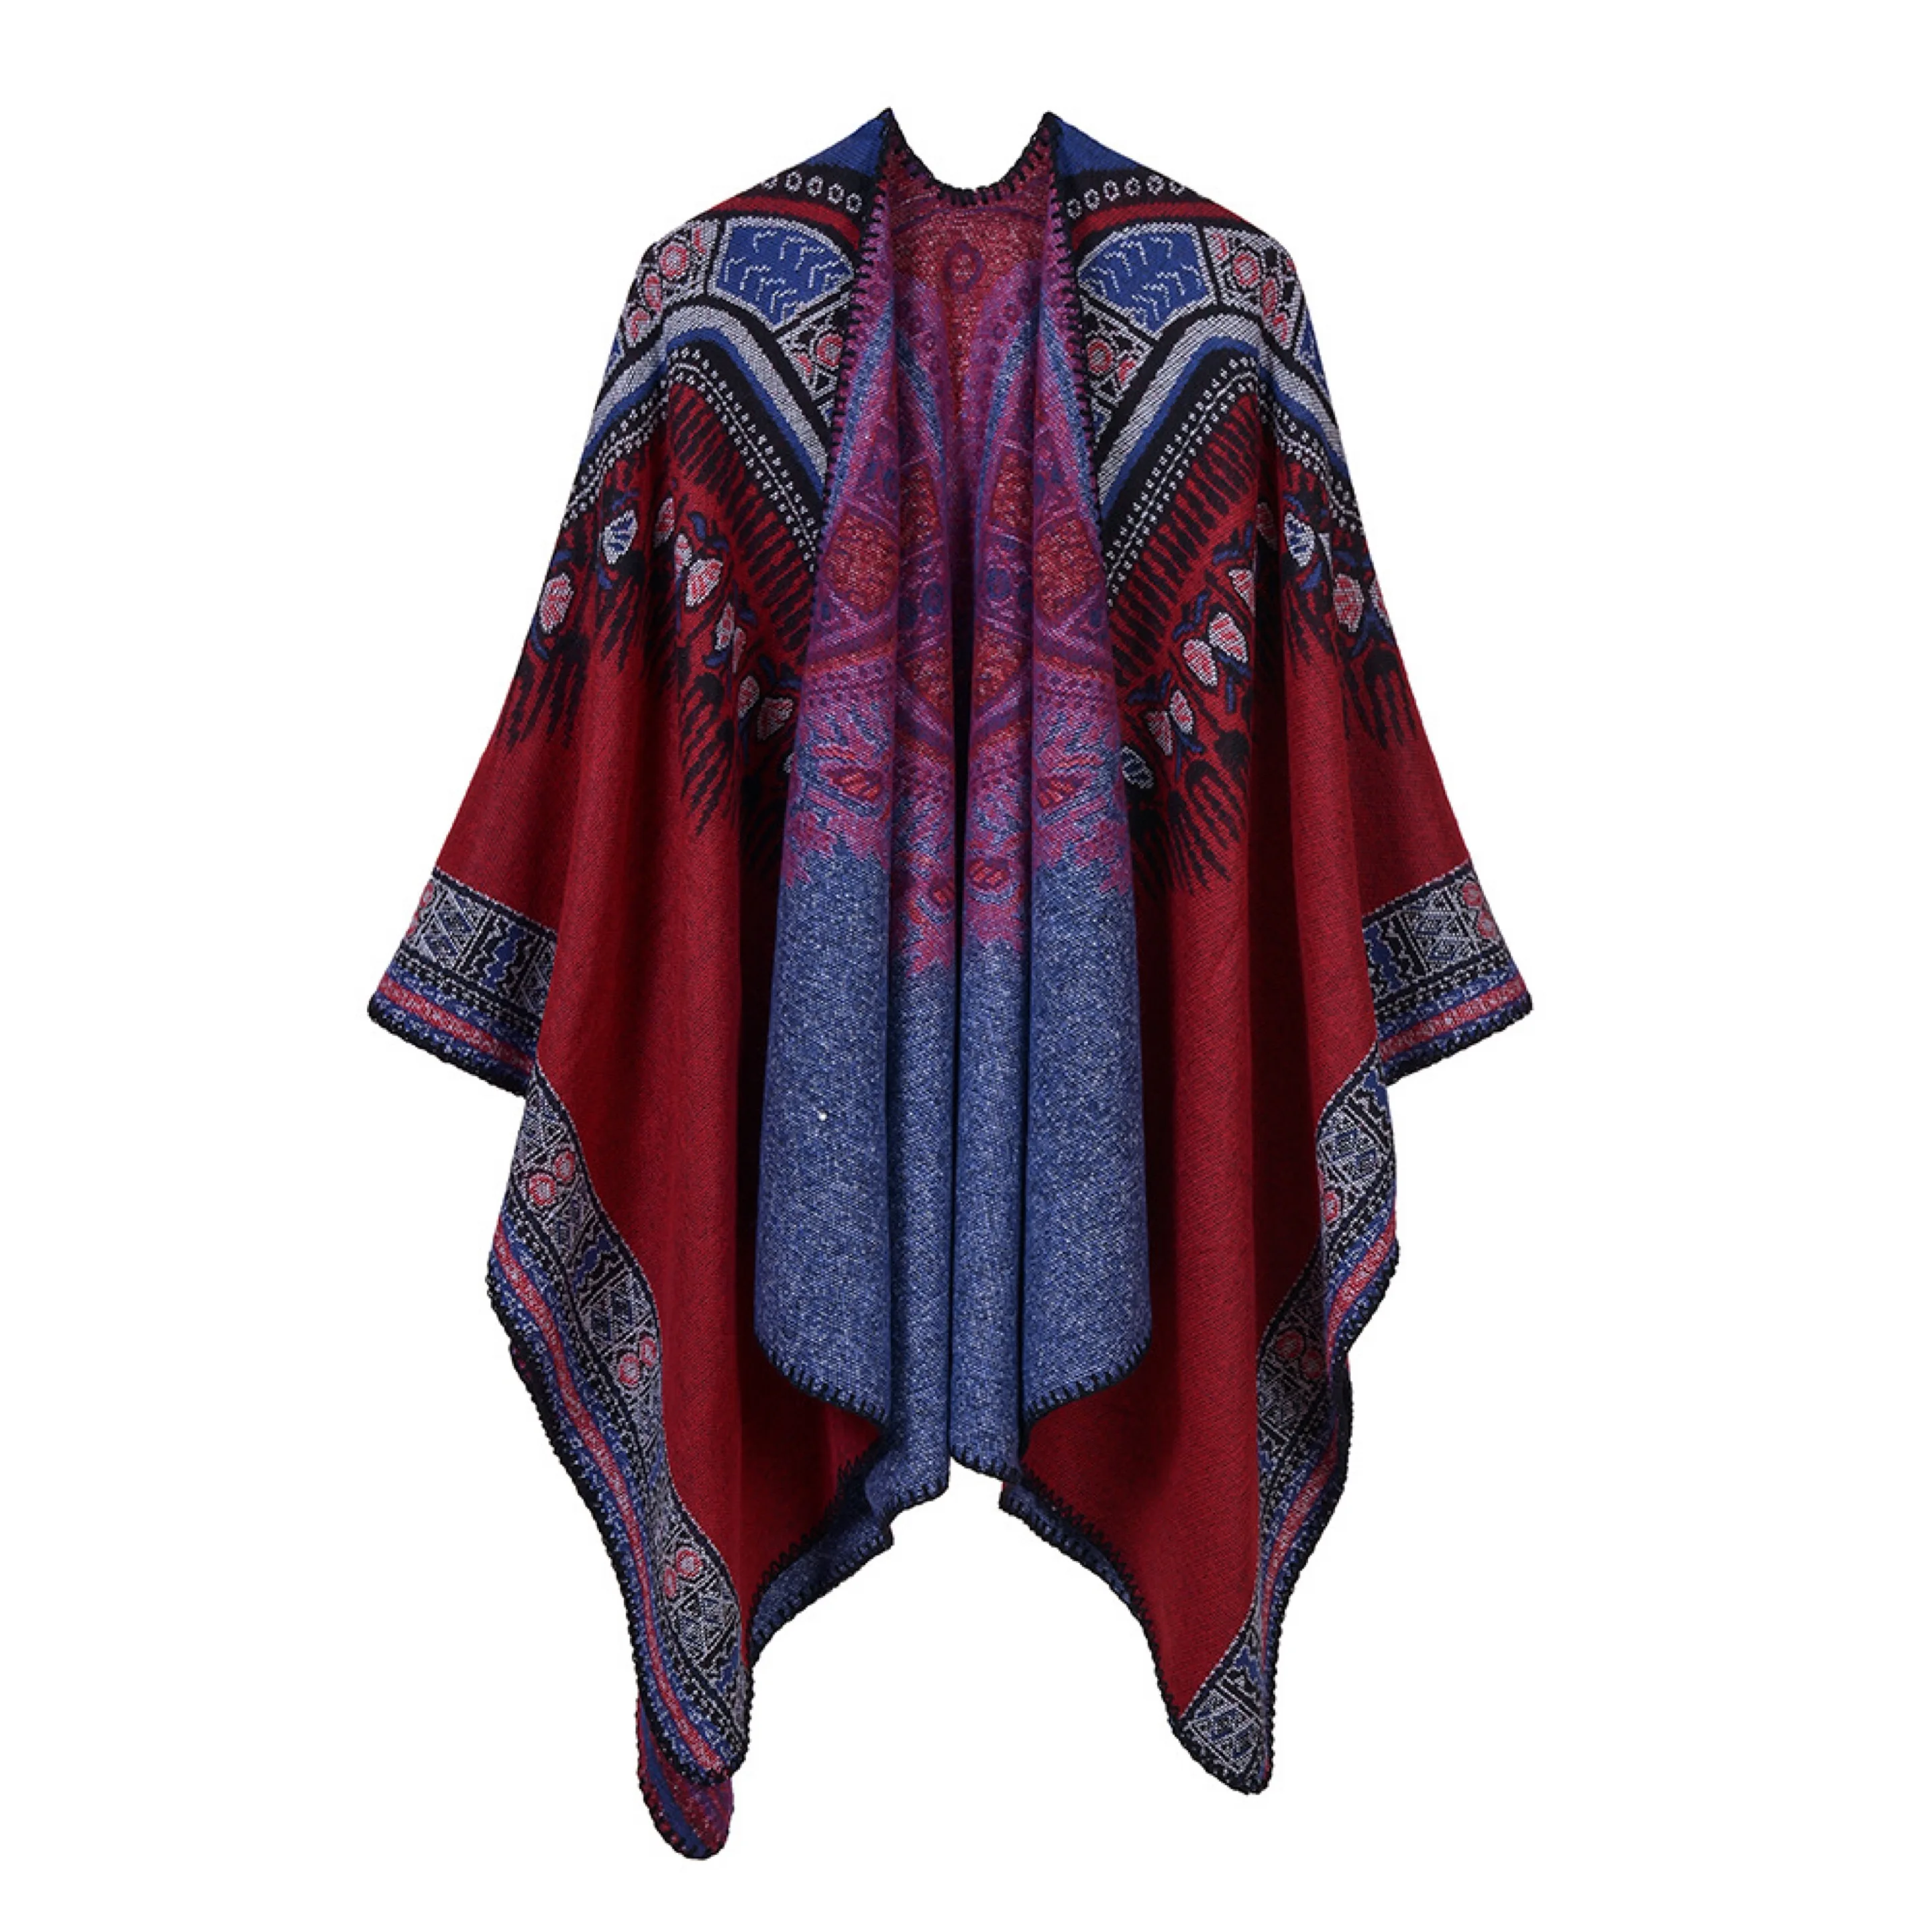 

KHALEE YOSE Vintage BohoEthnic Cloak Cardigan Floral Knitted Cape Women Cape Shawl Poncho Autumn Spring Thick Warm Outwear New